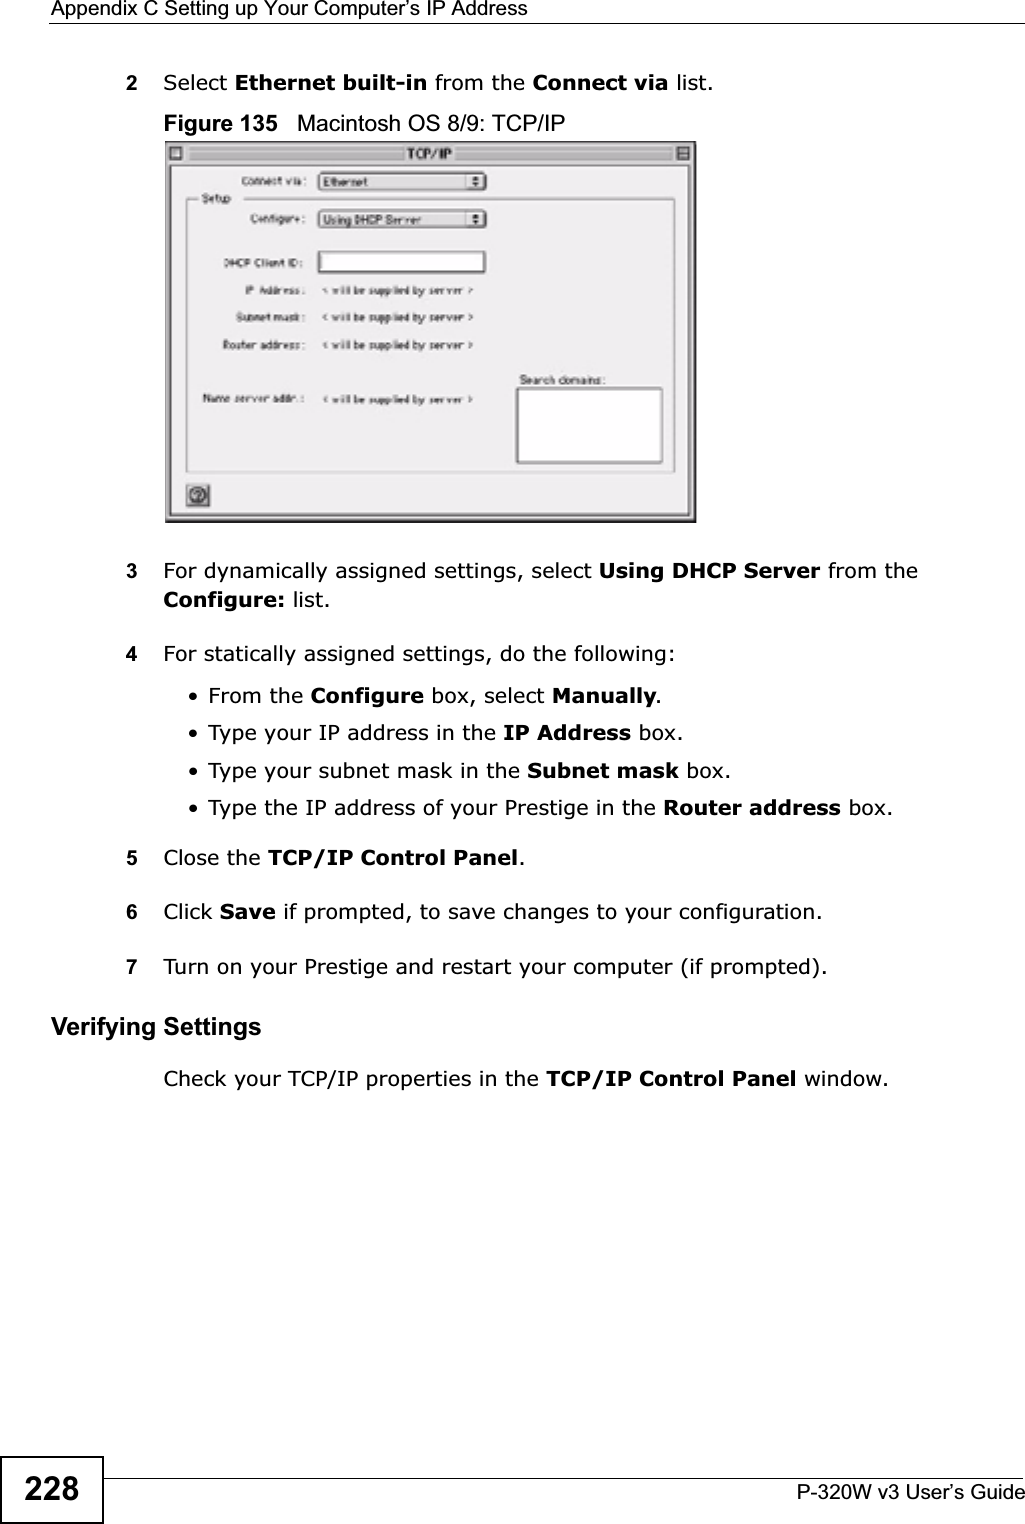 Appendix C Setting up Your Computer’s IP AddressP-320W v3 User’s Guide2282Select Ethernet built-in from the Connect via list.Figure 135   Macintosh OS 8/9: TCP/IP3For dynamically assigned settings, select Using DHCP Server from the Configure: list.4For statically assigned settings, do the following:•From the Configure box, select Manually.• Type your IP address in the IP Address box.• Type your subnet mask in the Subnet mask box.• Type the IP address of your Prestige in the Router address box.5Close the TCP/IP Control Panel.6Click Save if prompted, to save changes to your configuration.7Turn on your Prestige and restart your computer (if prompted).Verifying SettingsCheck your TCP/IP properties in the TCP/IP Control Panel window.